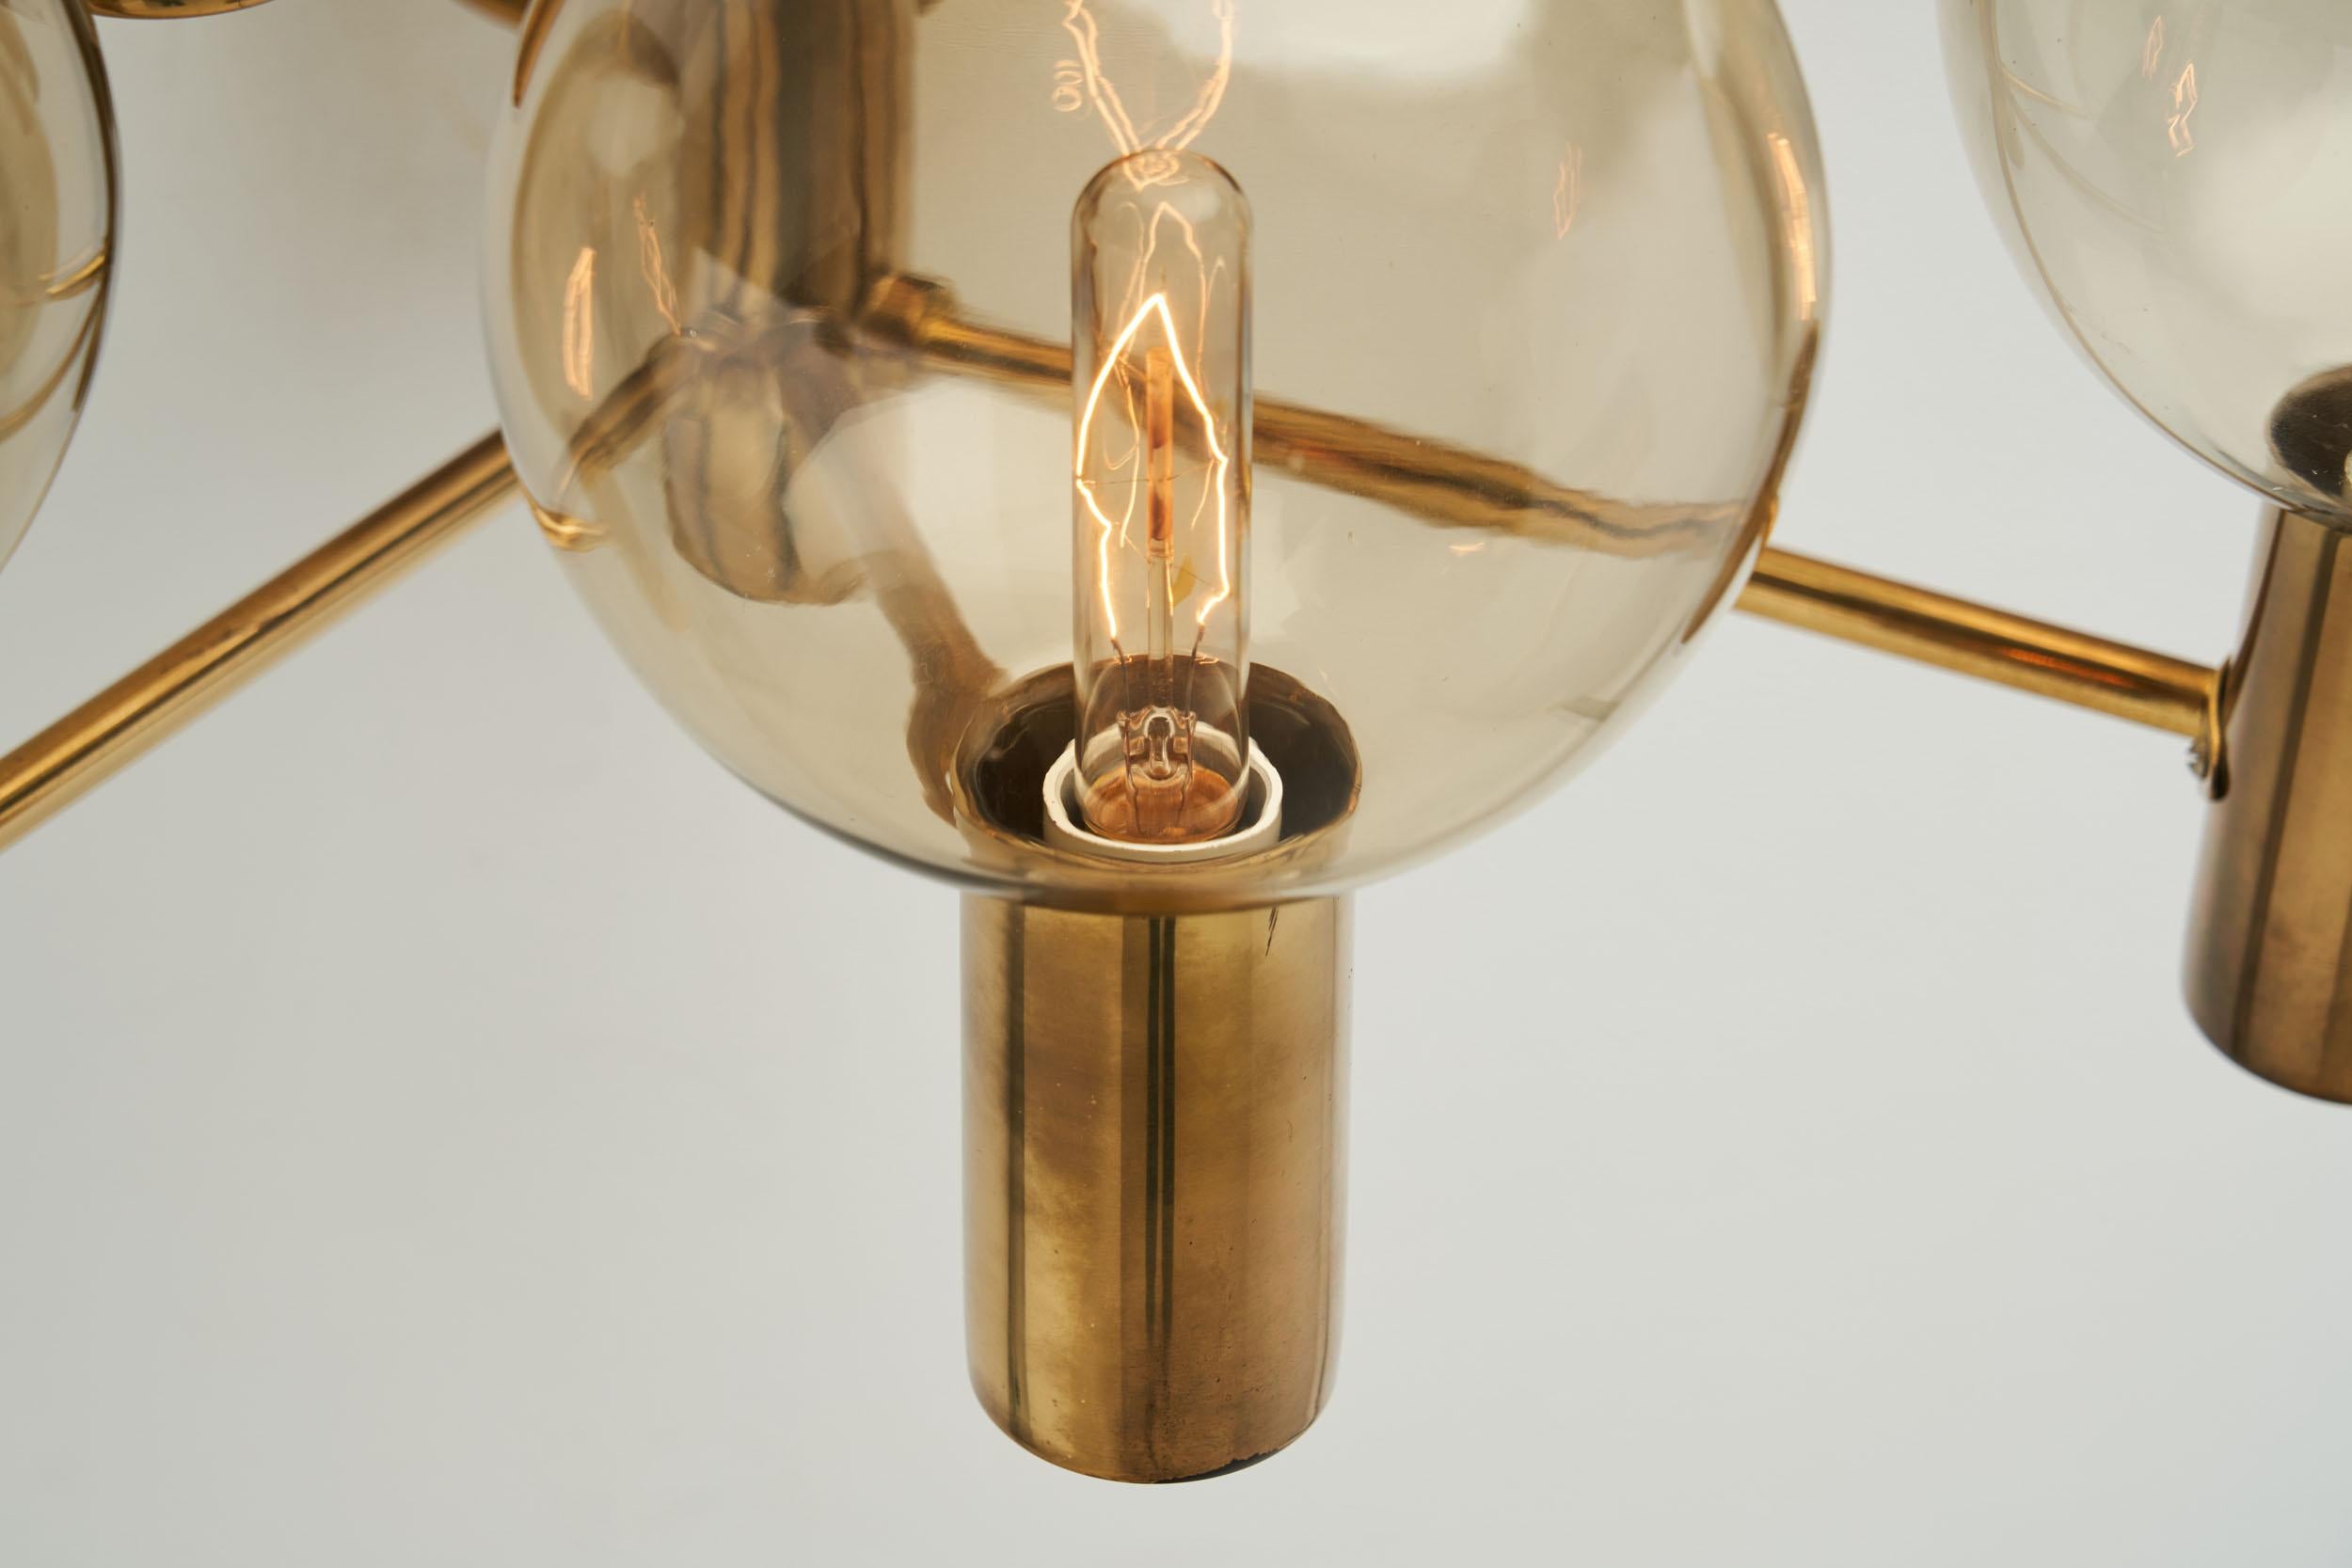 Hans-Agne Jakobsson Brass Wall Lamp with Smoked Glass Shades, Sweden, 1960s For Sale 1